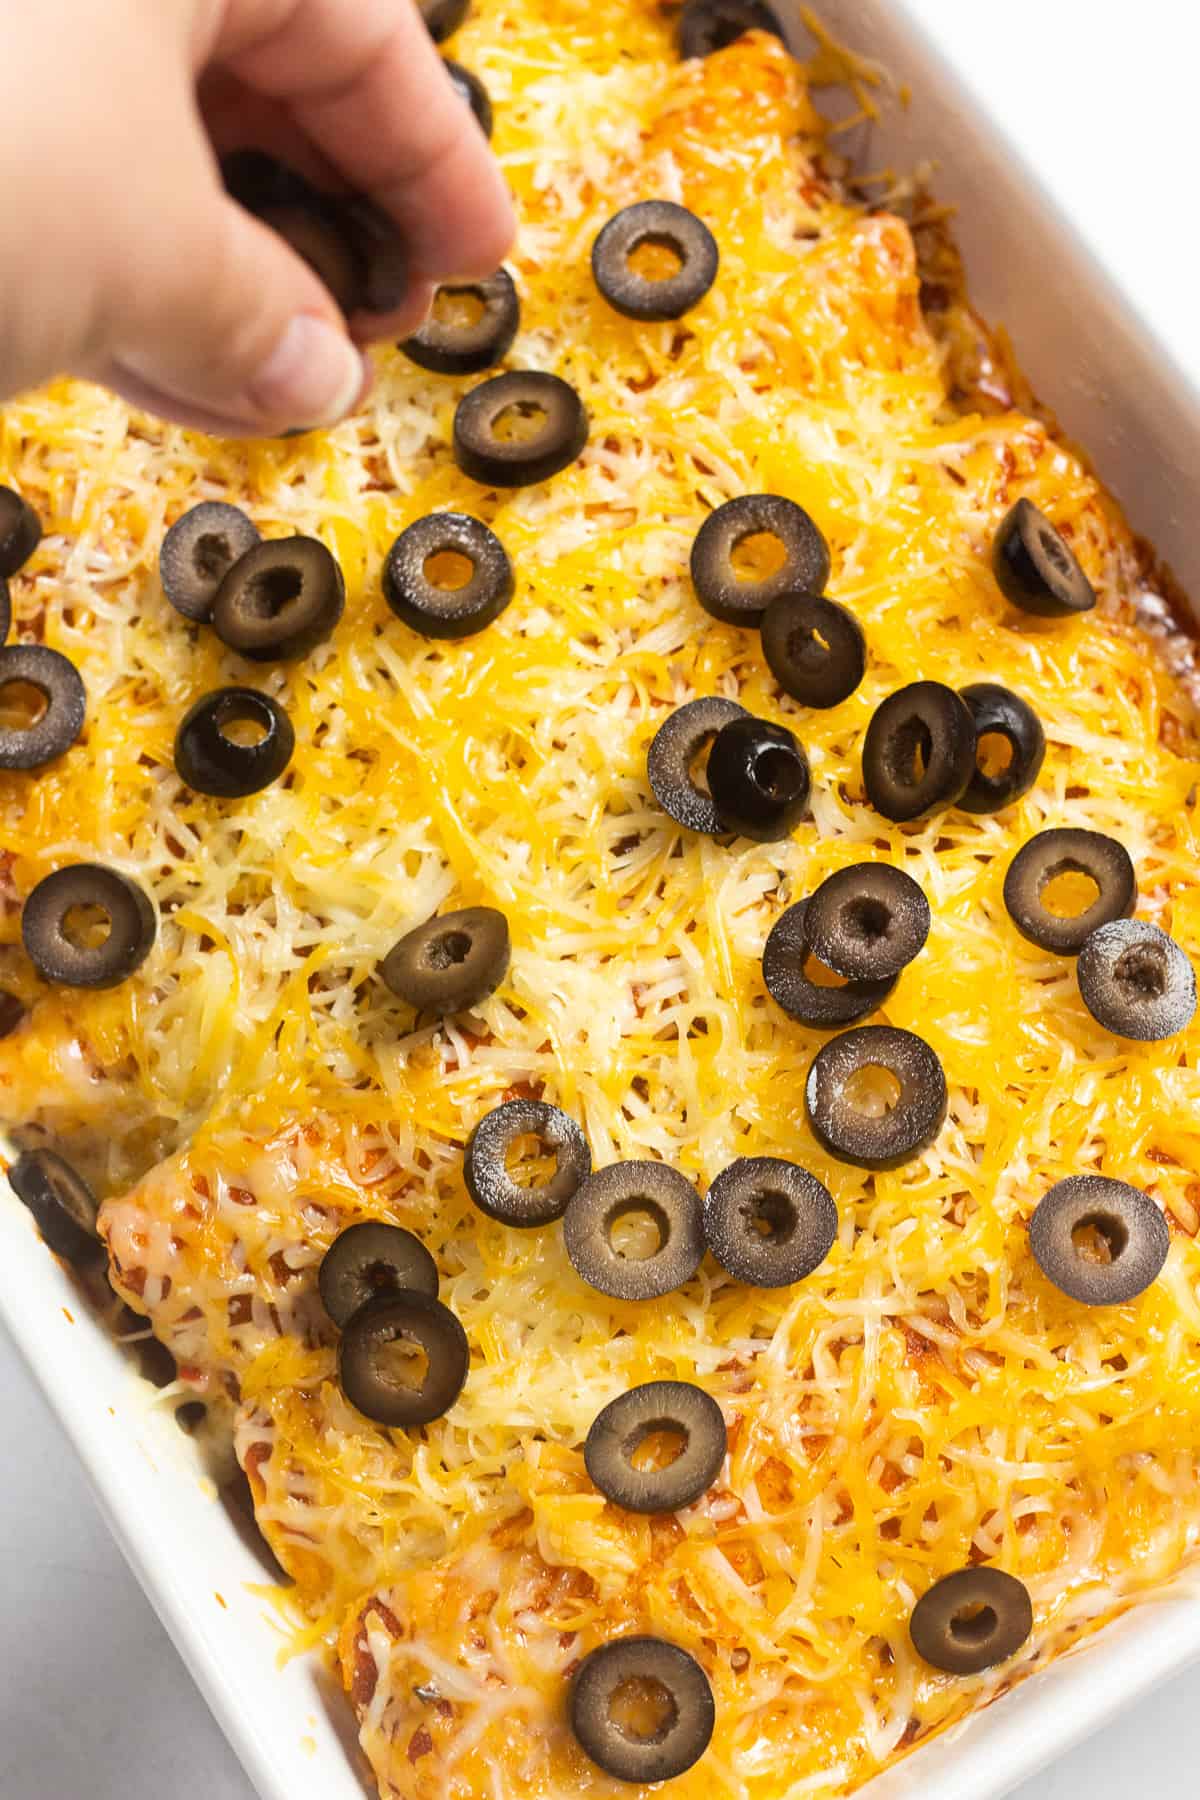 A hand sprinkling sliced olives over half cooked enchiladas in a white baking dish.